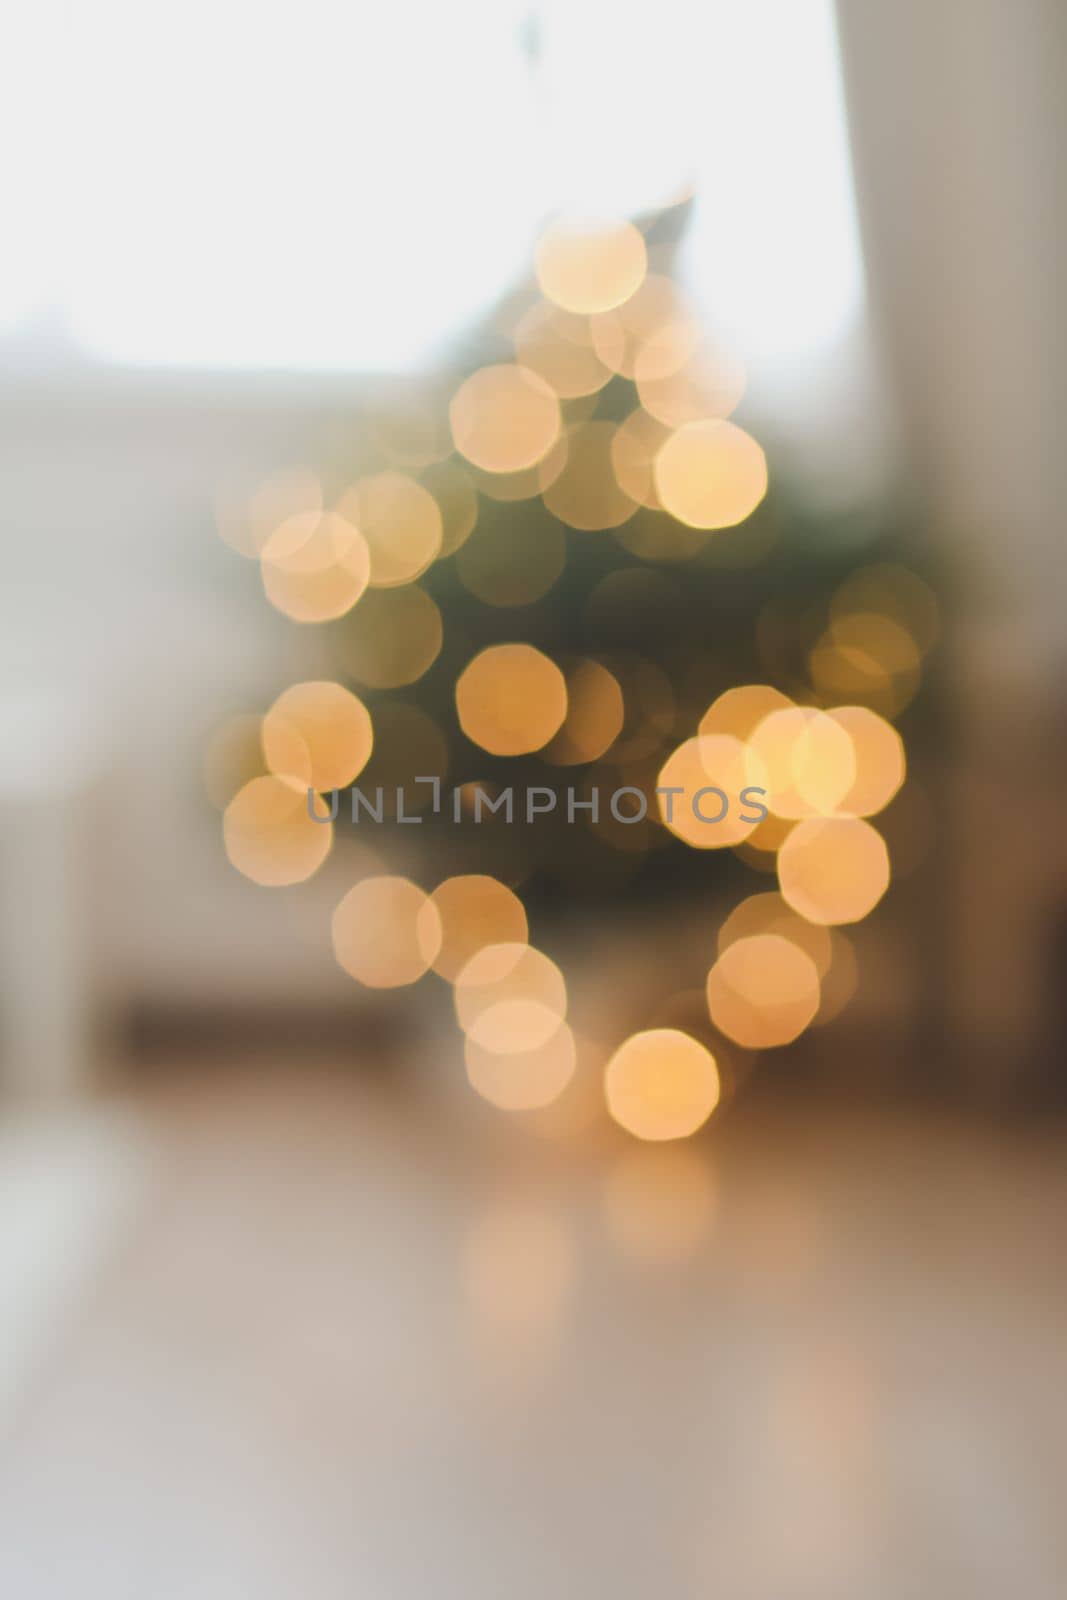 christmas background with christmas tree out of focus. abstract christmas background with defocused lights.